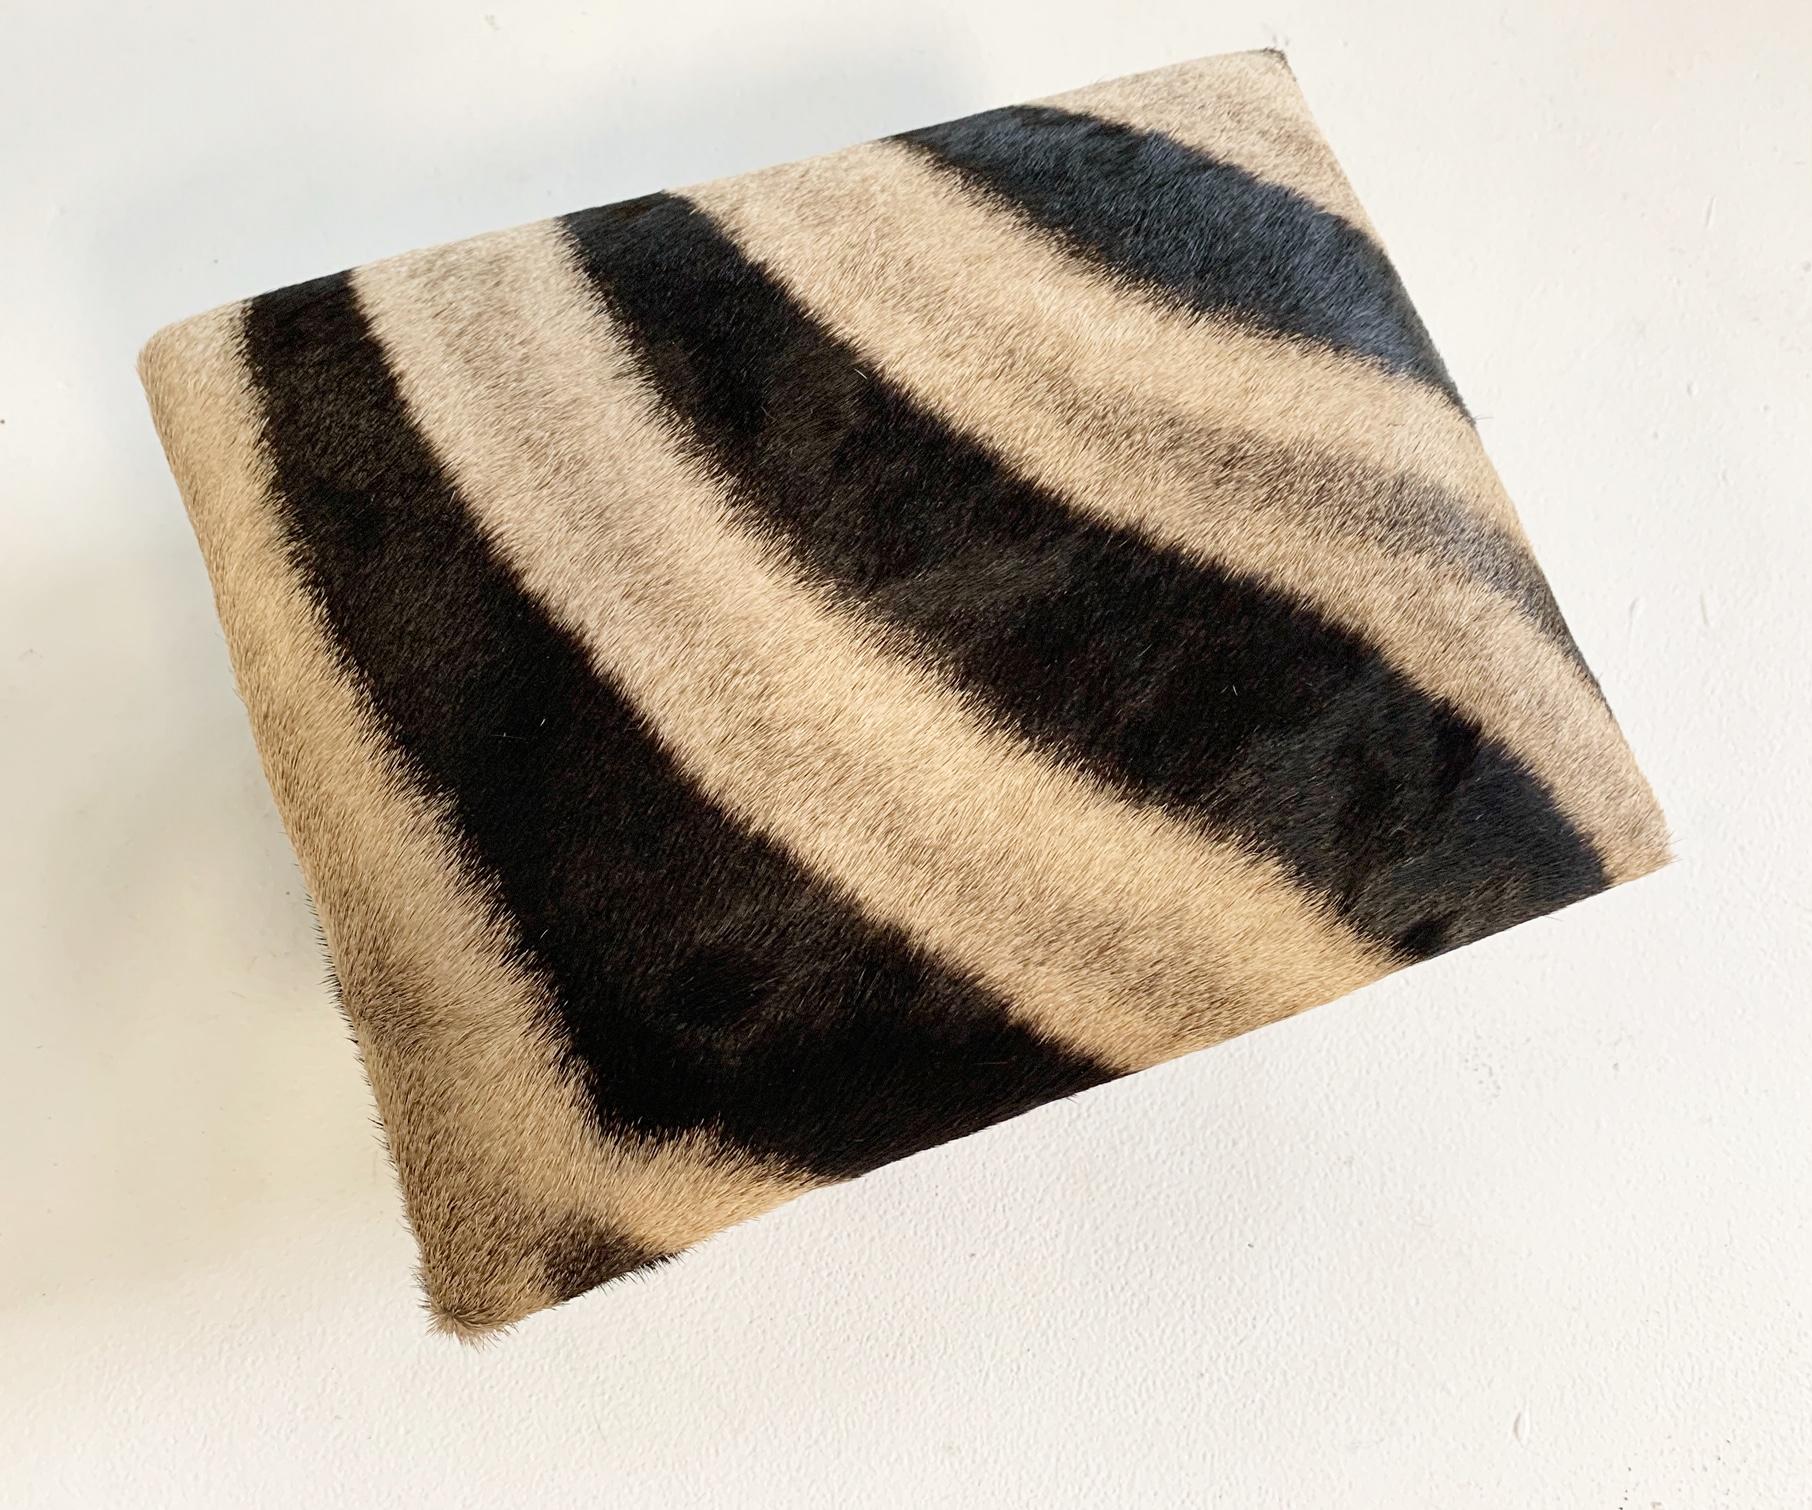 Upholstered in beautiful zebra hide, this handy foot stool is the perfect accent piece. We love the carved legs.